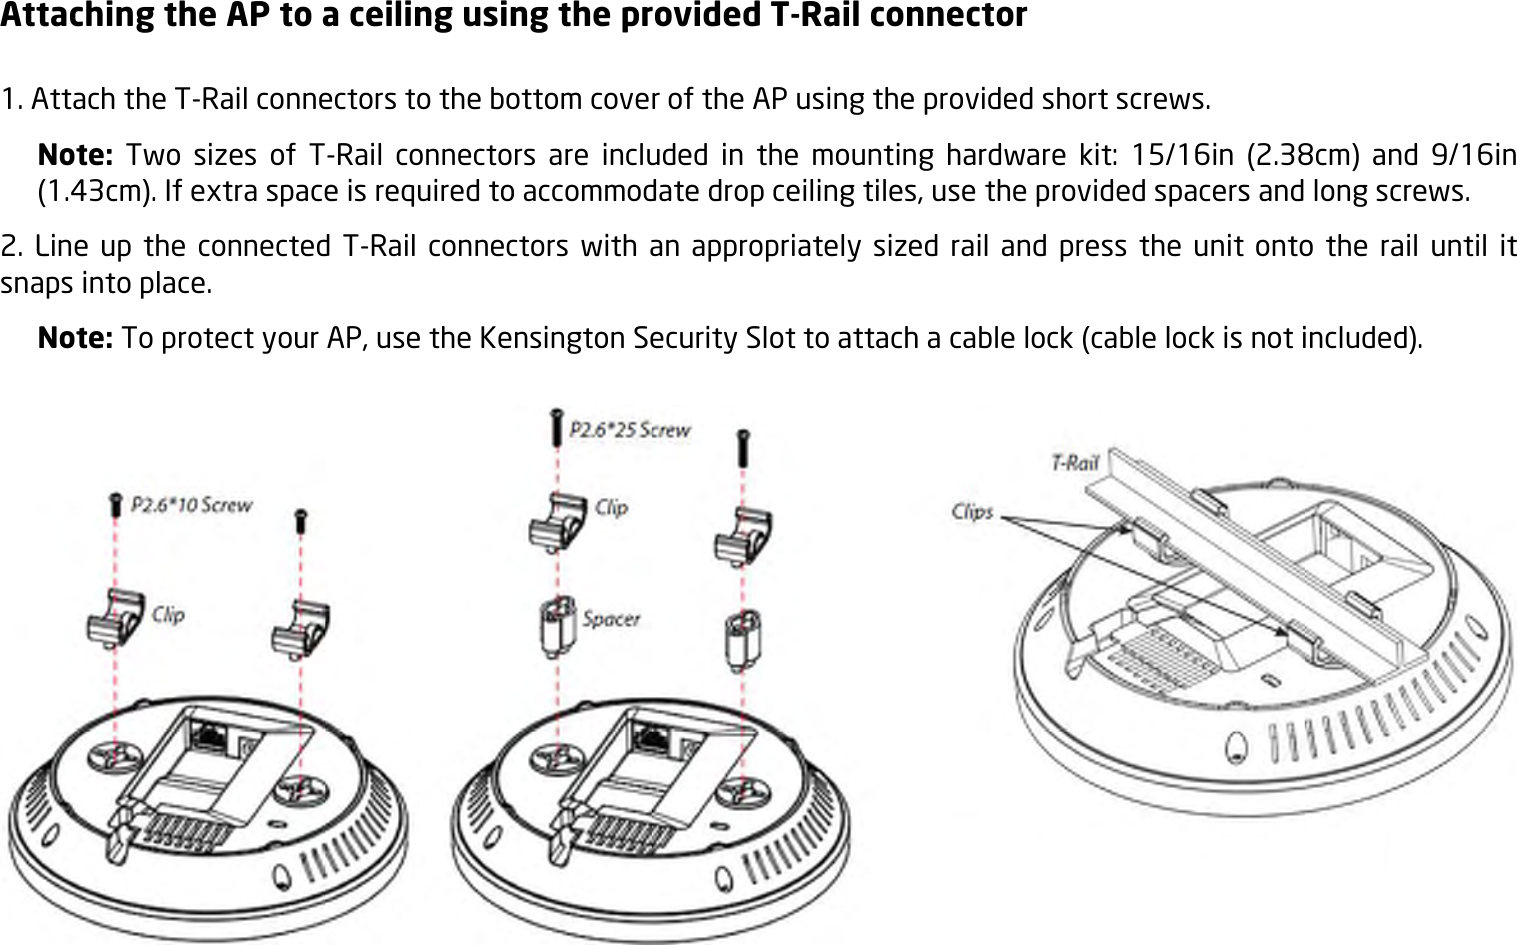 Attaching the AP to a ceiling using the provided T-Rail connector  1. Attach the T-Rail connectors to the bottom cover of the AP using the provided short screws. Note:  Two  sizes  of  T-Rail  connectors  are  included  in  the  mounting  hardware  kit:  15/16in  (2.38cm)  and  9/16in (1.43cm). If extra space is required to accommodate drop ceiling tiles, use the provided spacers and long screws.   2.  Line up  the connected T-Rail  connectors  with an appropriately sized  rail  and press  the  unit onto  the  rail until  it snaps into place. Note: To protect your AP, use the Kensington Security Slot to attach a cable lock (cable lock is not included).   